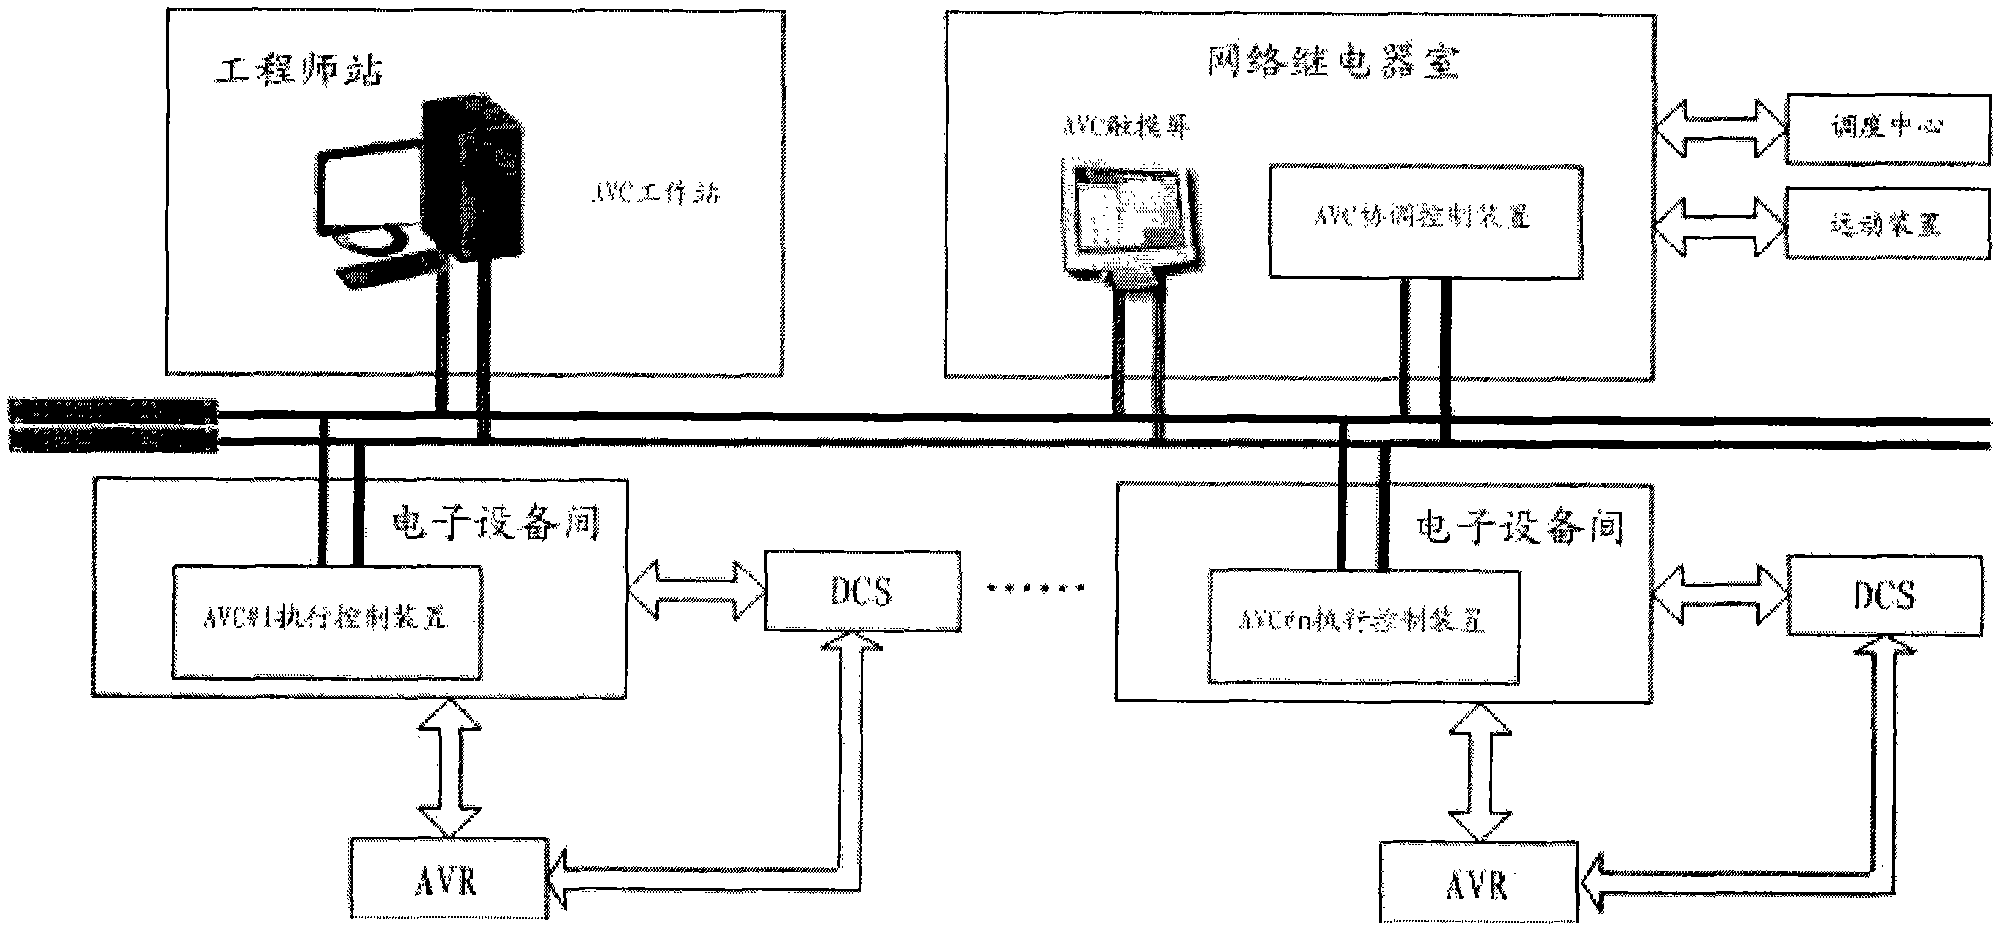 Automatic voltage control substation system of distributed power station based on devices